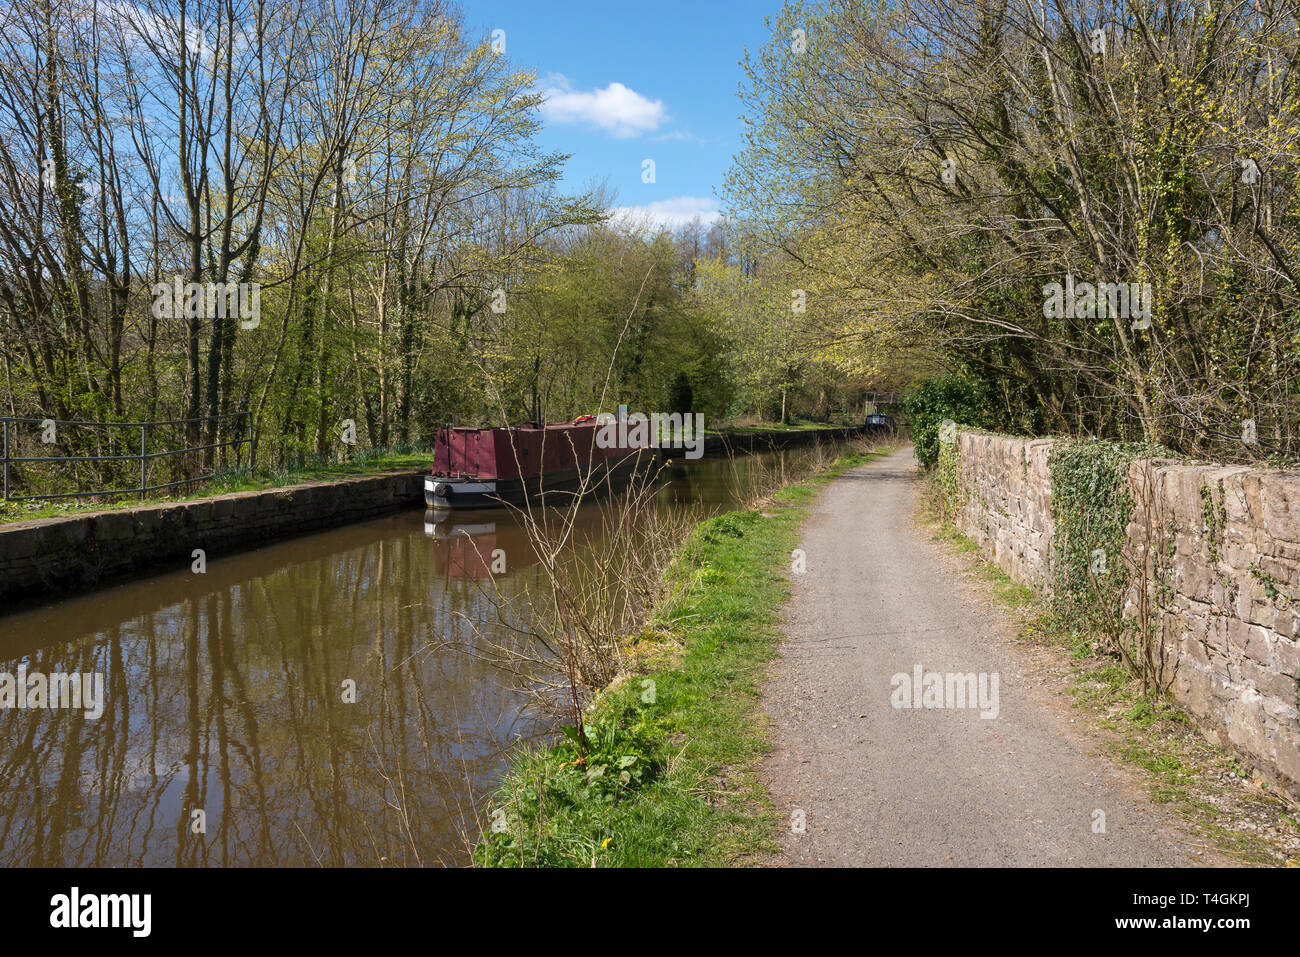 Sunny spring day on the Peak Forest canal near Whaley Bridge, Derbyshire, England. Stock Photo